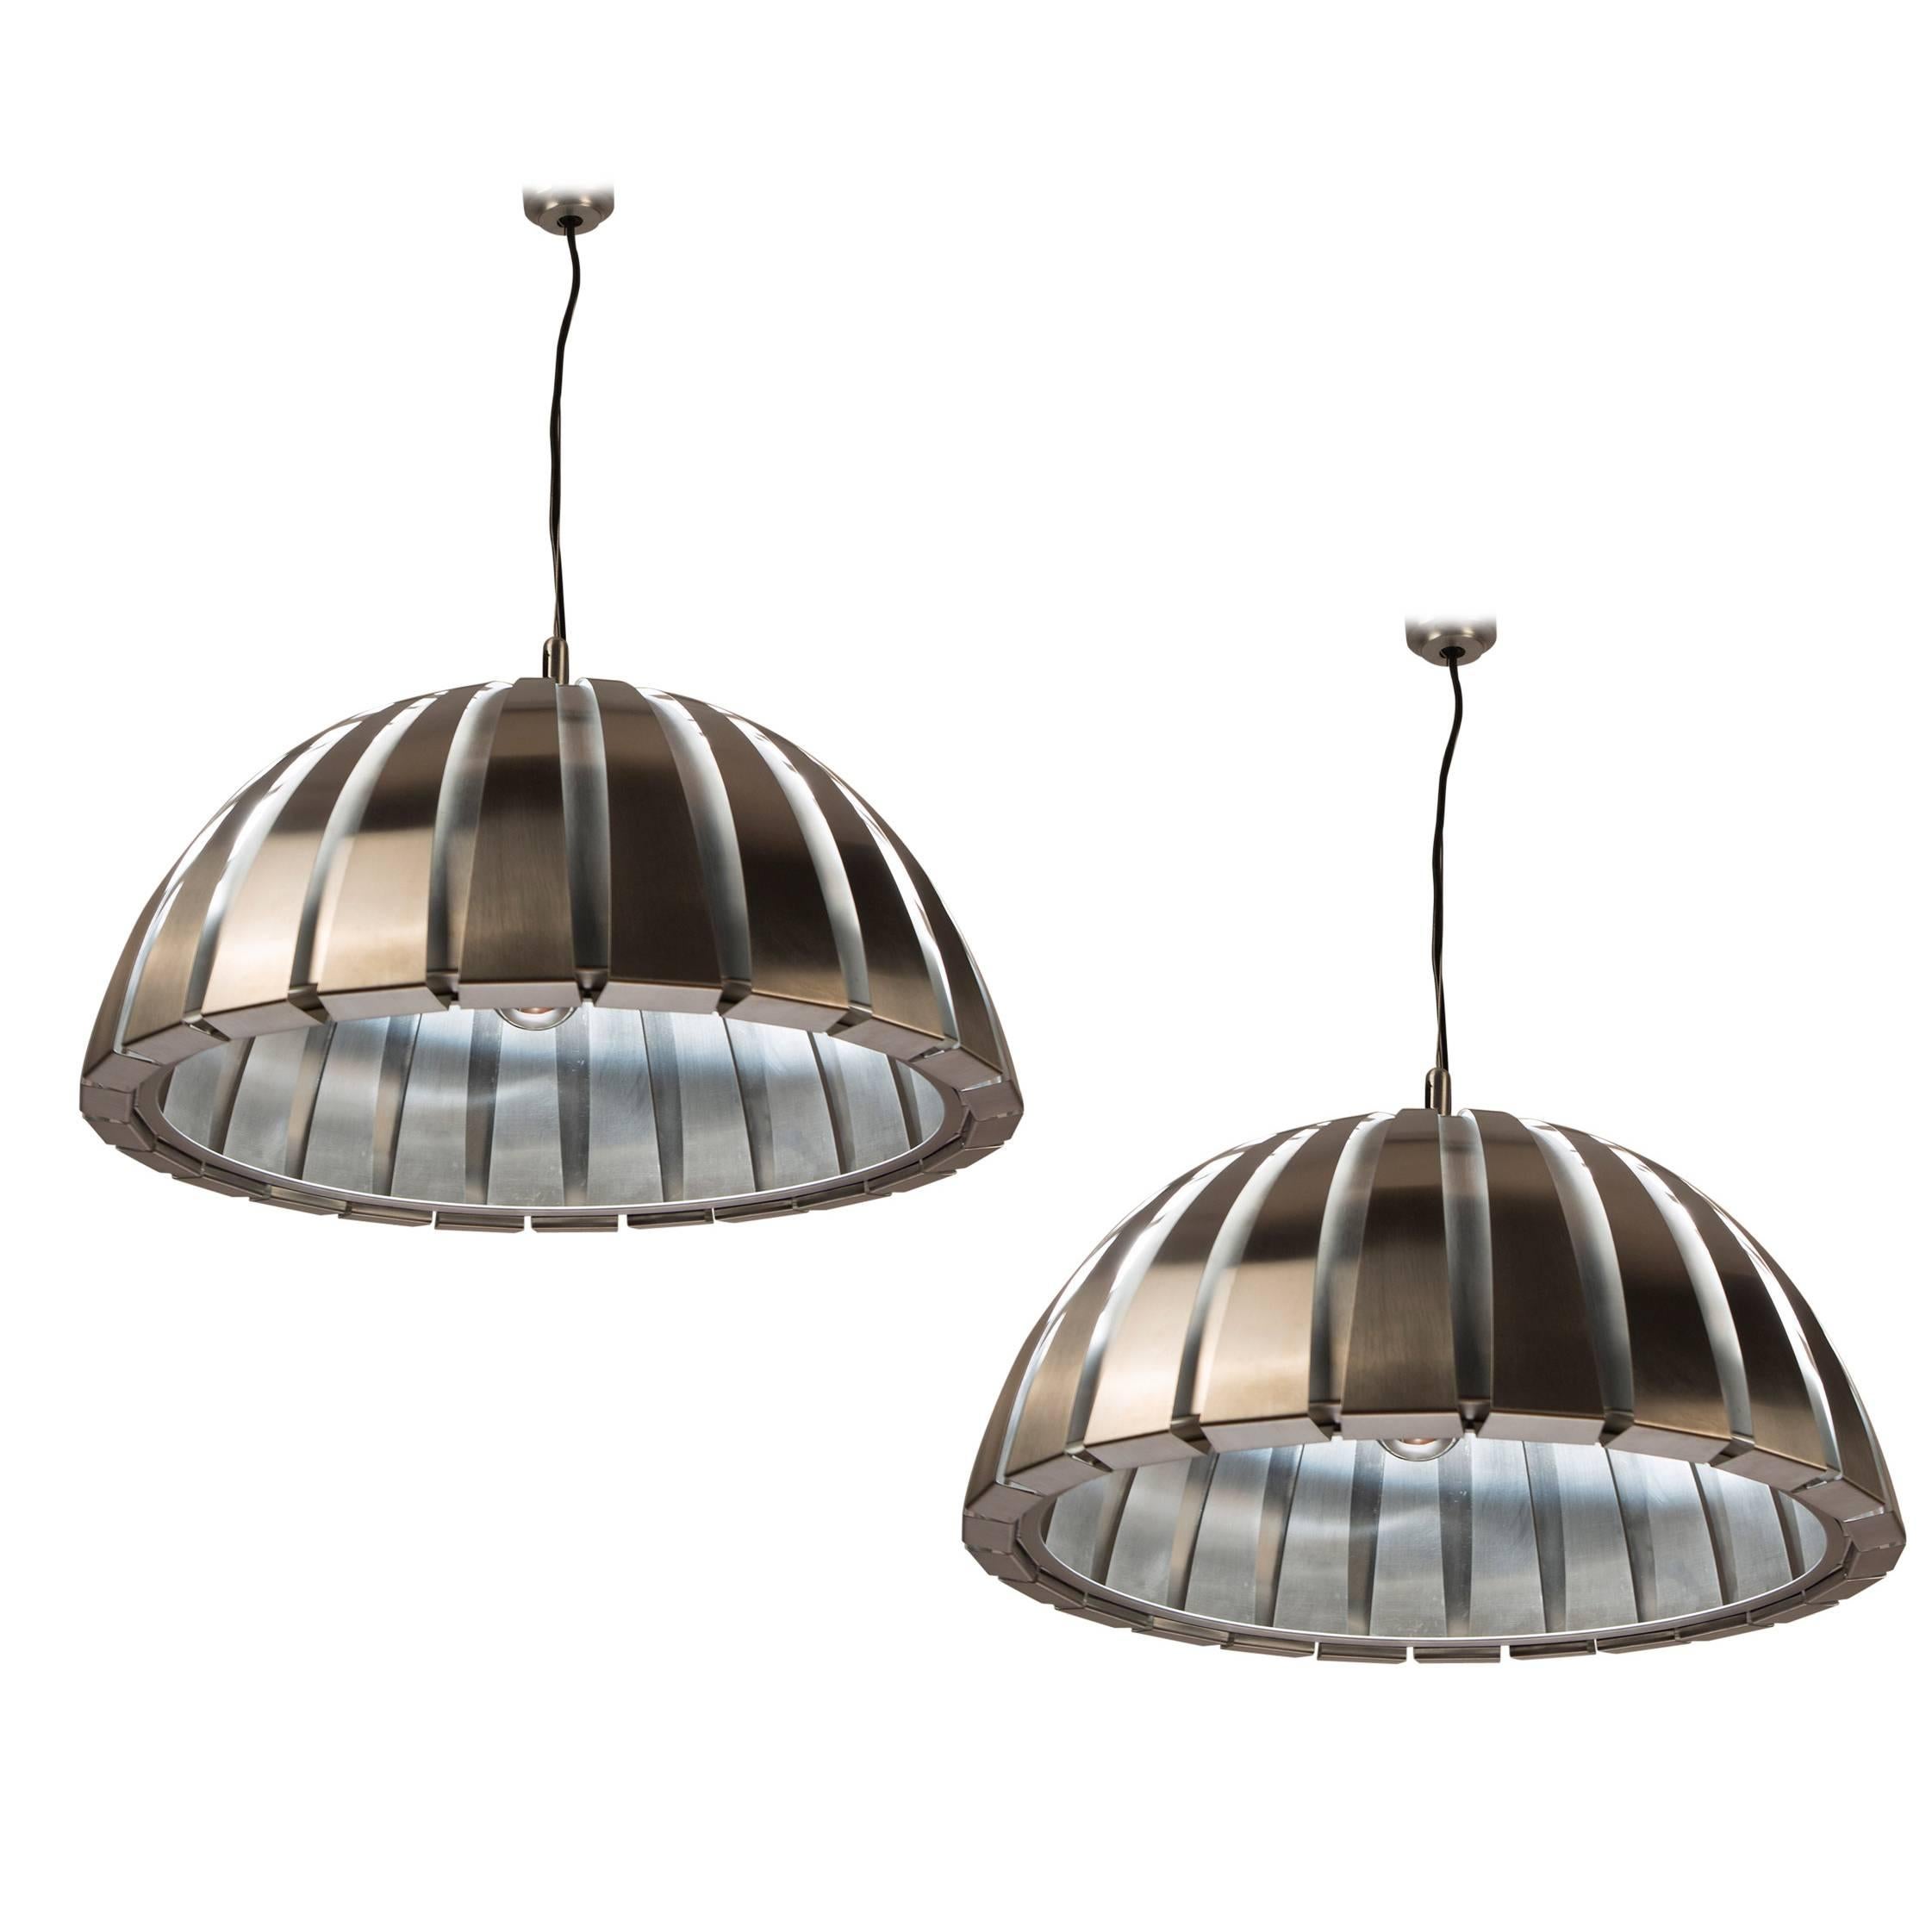 Set of Two Steel Ceiling Lamps by Elio Martinelli for Martinelli, Italy, 1960s